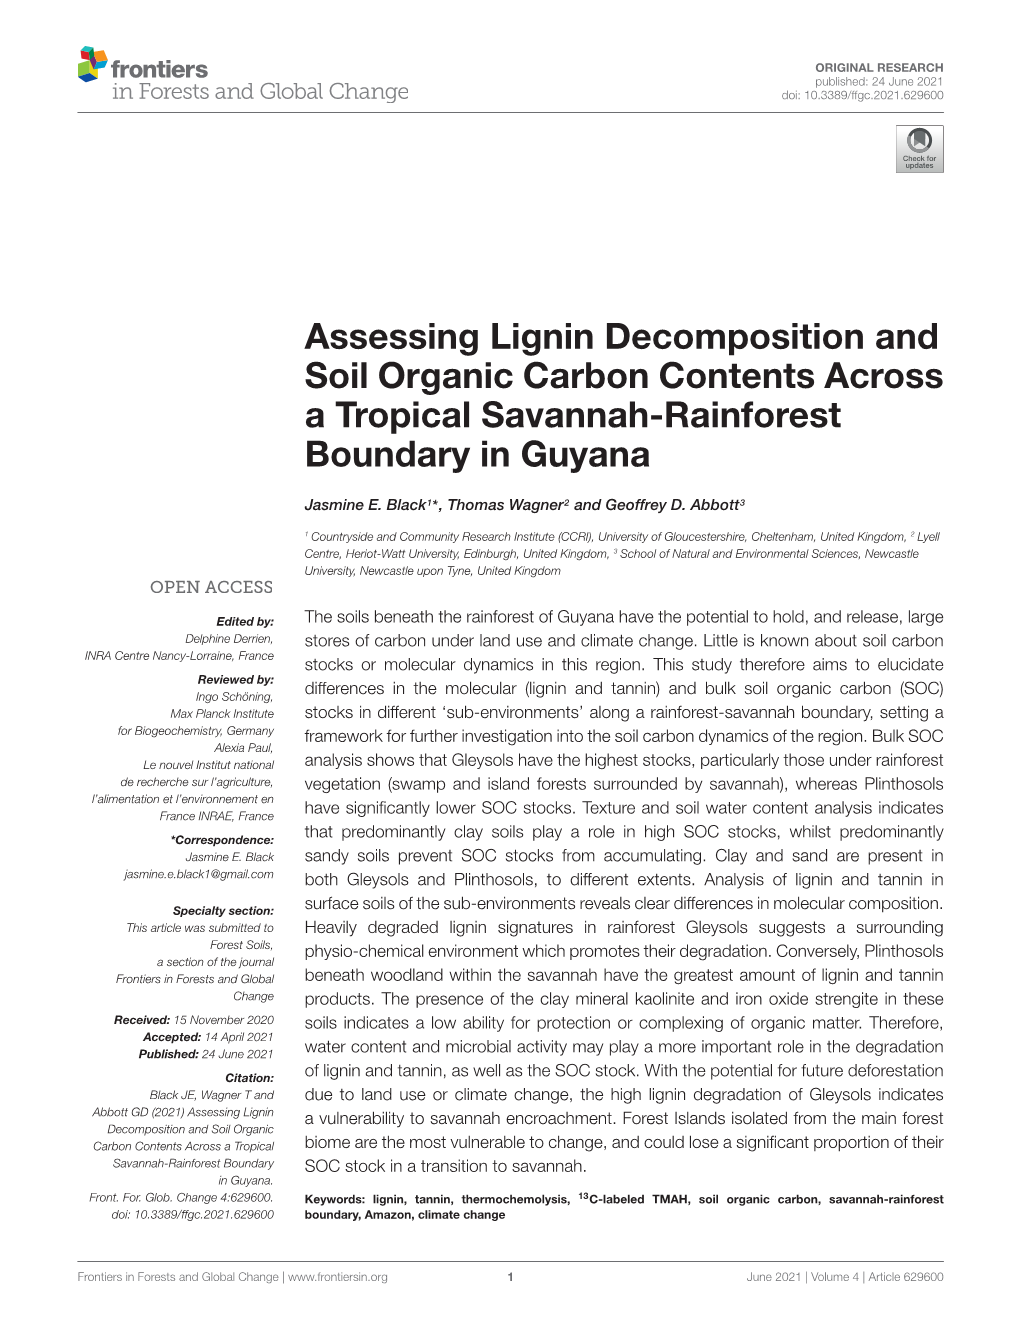 Assessing Lignin Decomposition and Soil Organic Carbon Contents Across a Tropical Savannah-Rainforest Boundary in Guyana